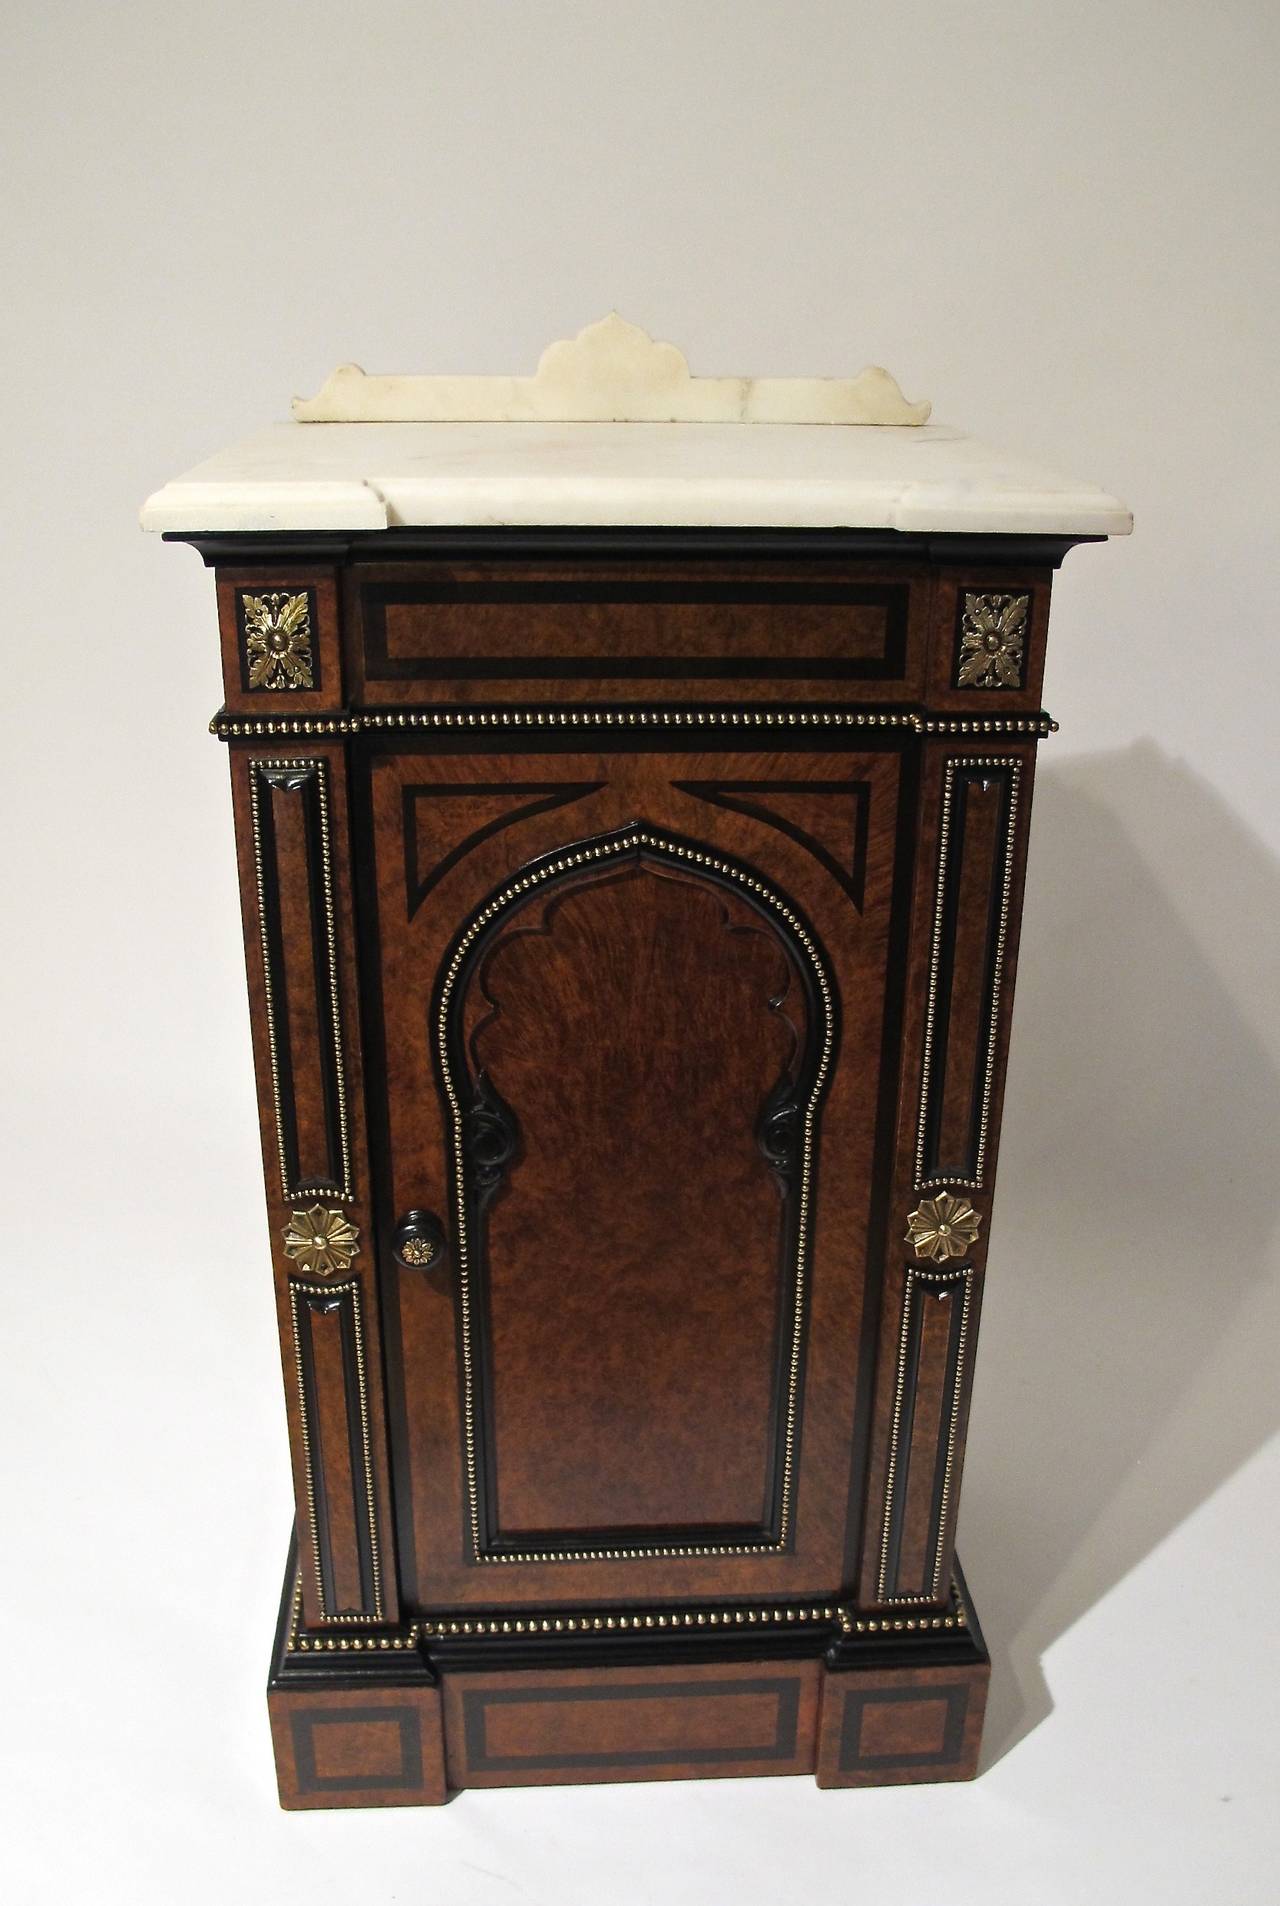 Moroccan or Arabesque style side cabinet/table. Beautiful mixed woods of burled walnut veneers and ebony with beaded brass trim,brass detailing and white marble top.